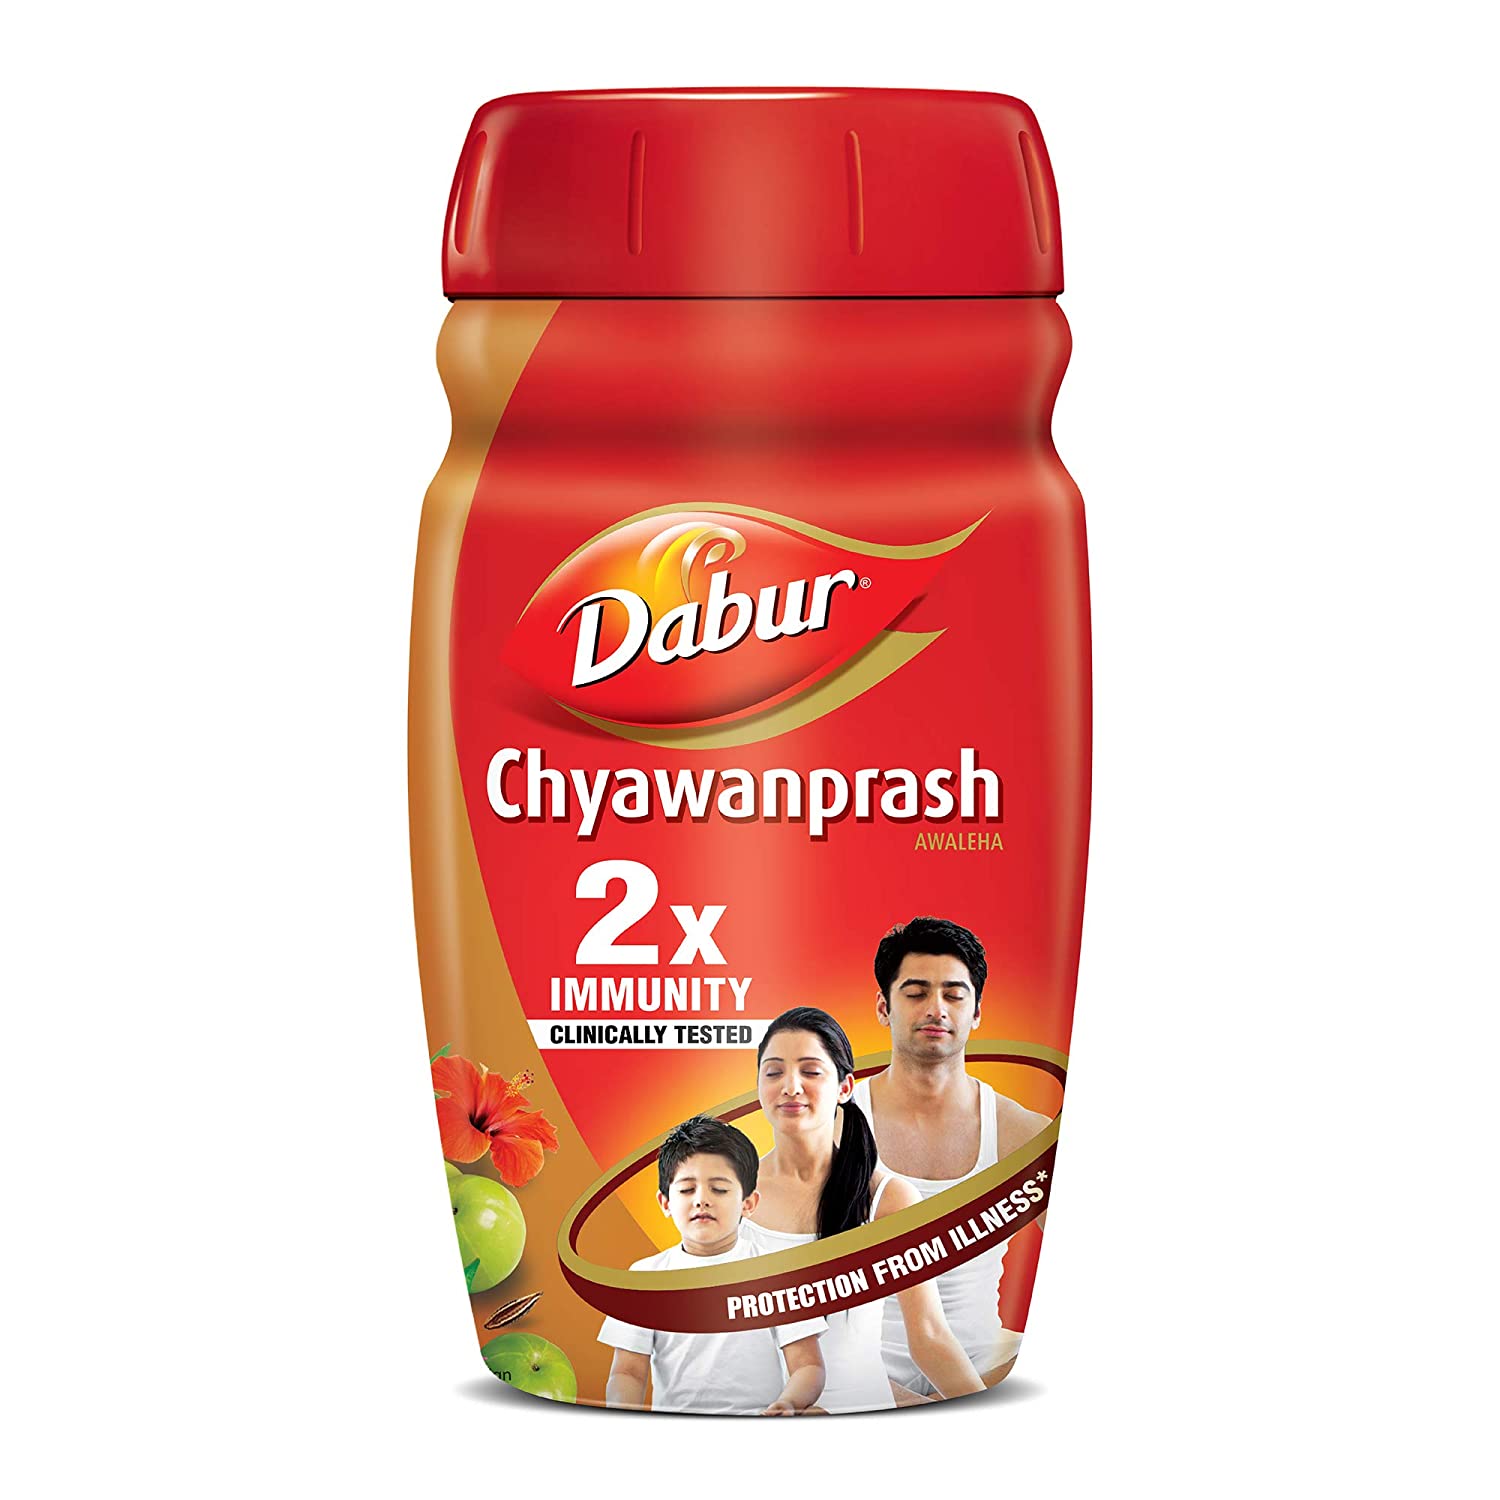 Dabur Chyawanprash Online Offer - Prices, Benefits And Other Details